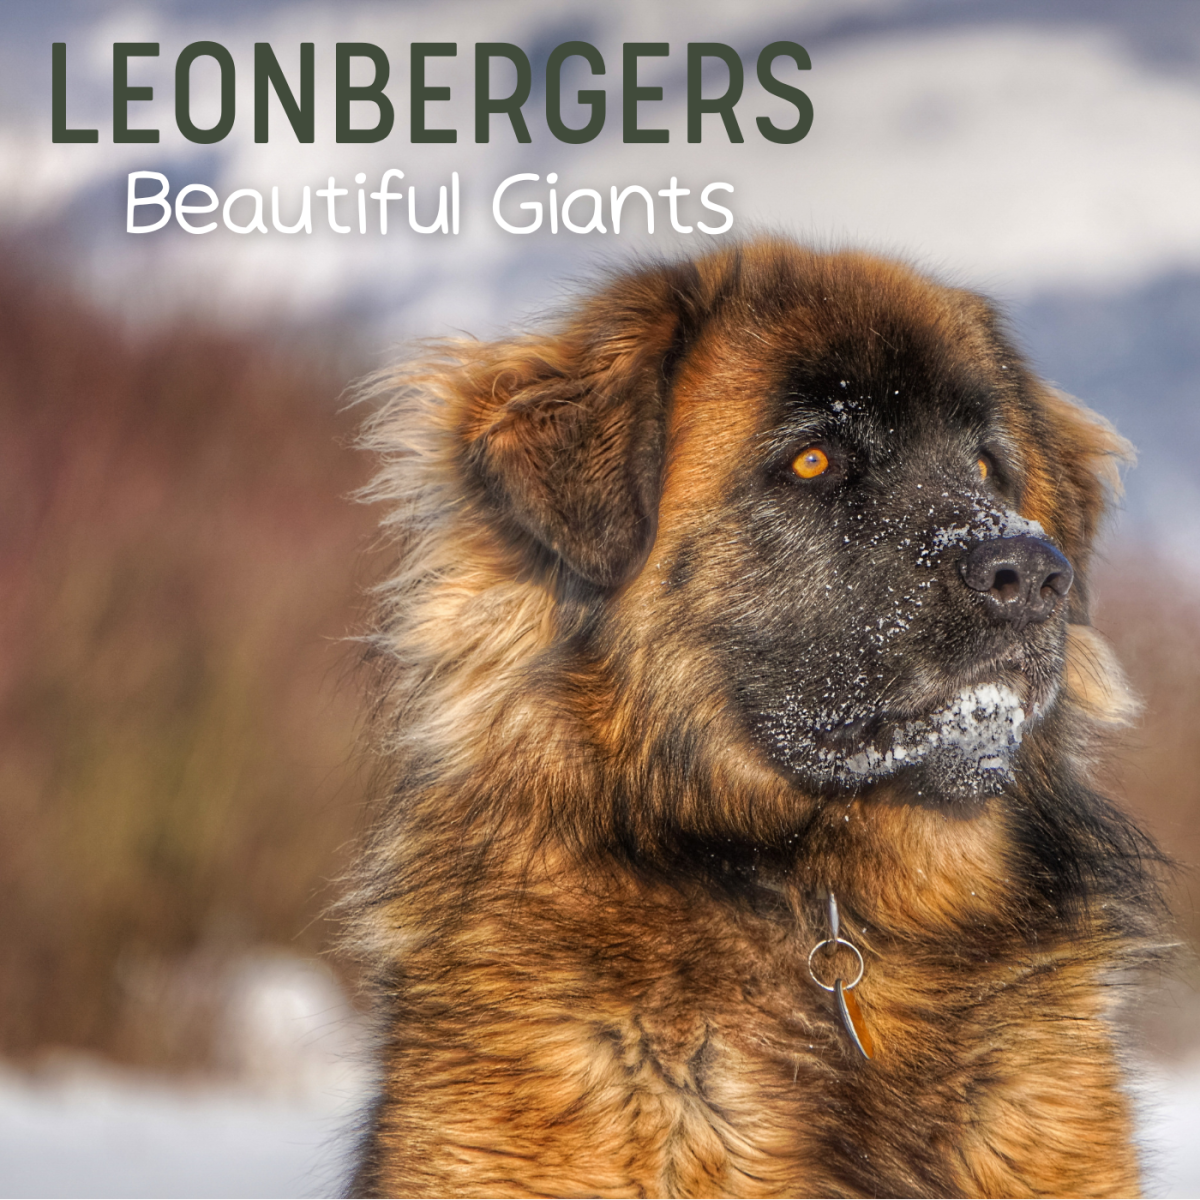 Leonberger: One of the Largest Dogs in the World